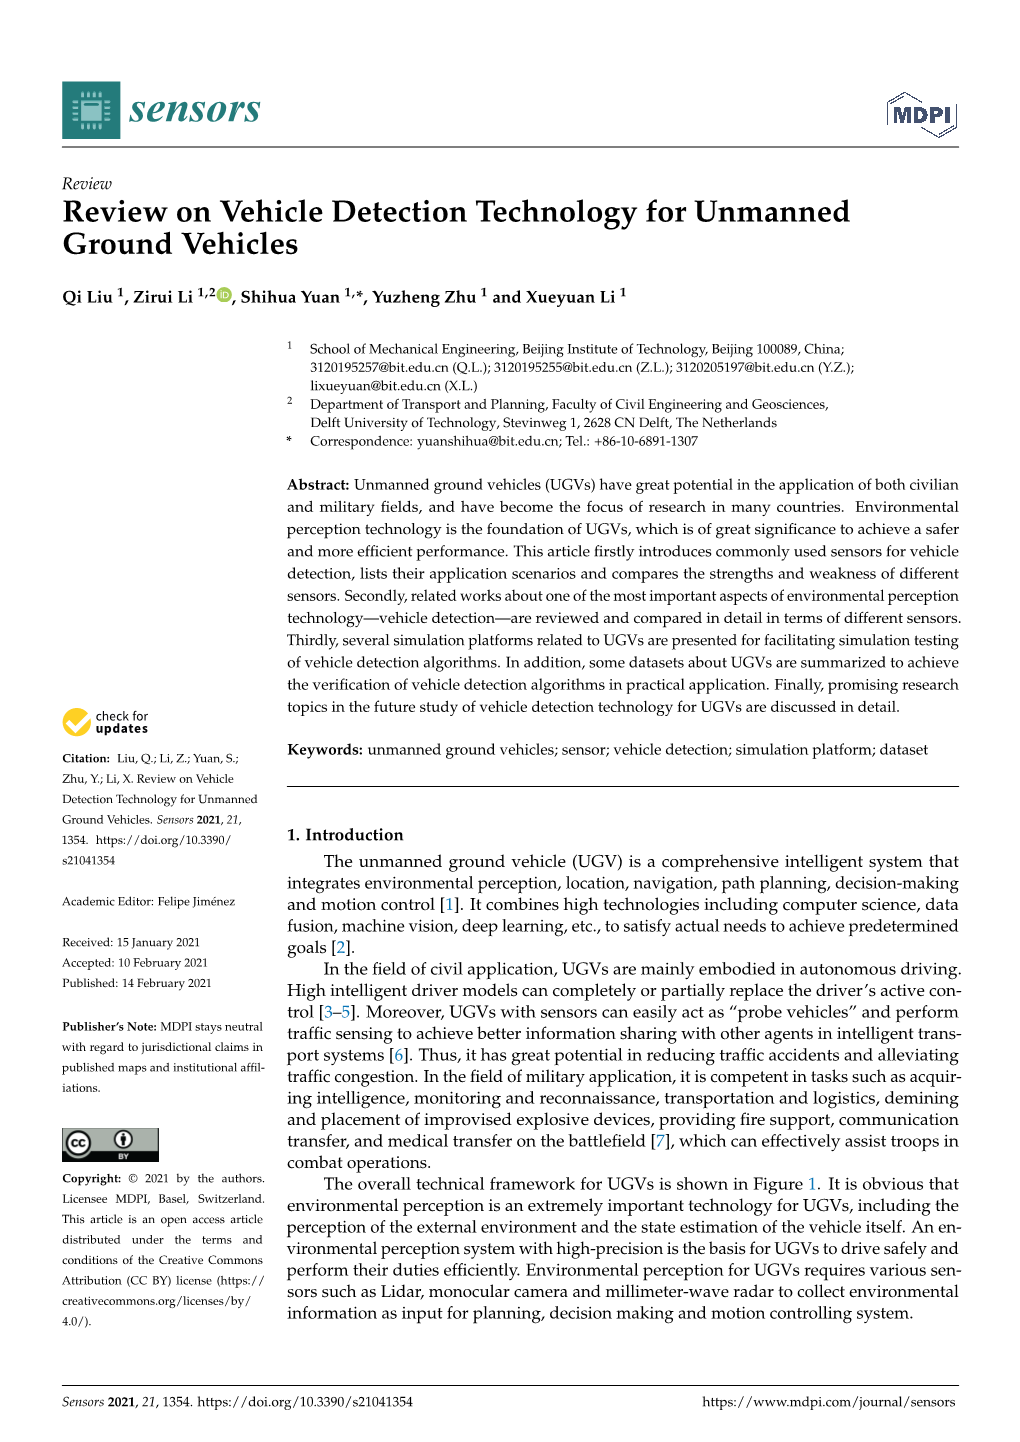 Review on Vehicle Detection Technology for Unmanned Ground Vehicles